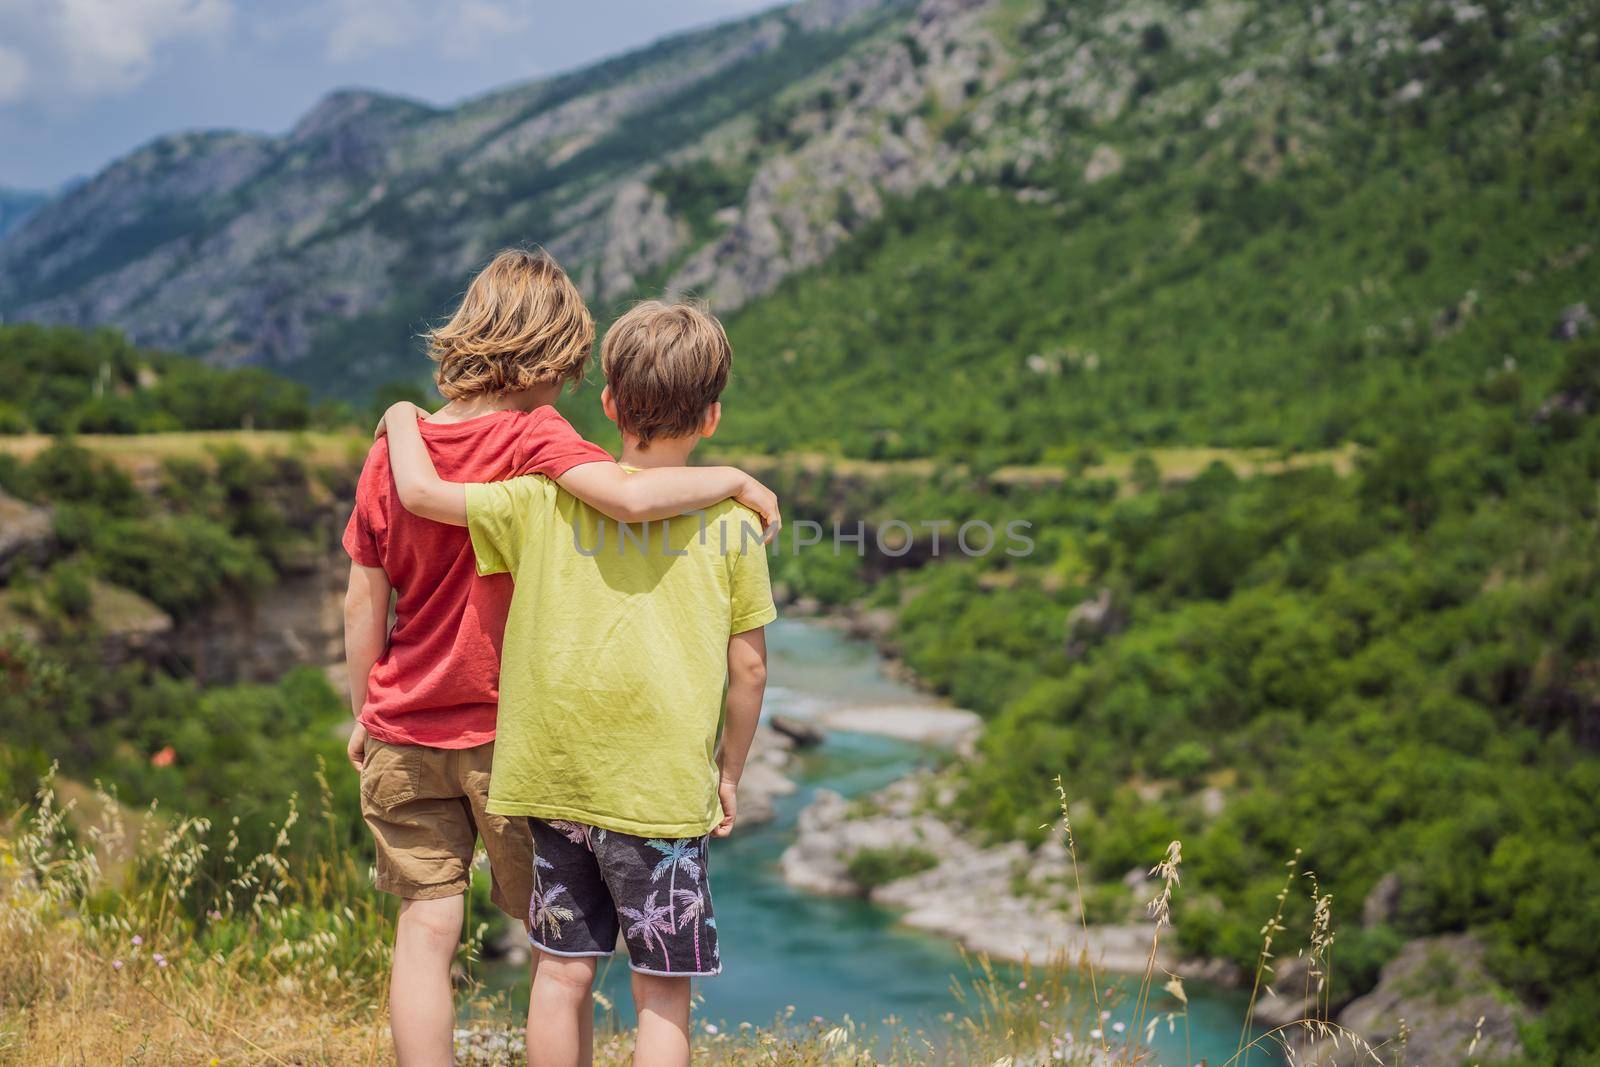 boys, friends tourists on background of purest waters of the turquoise color of the river Moraca flowing among the canyons. Travel around Montenegro concept.